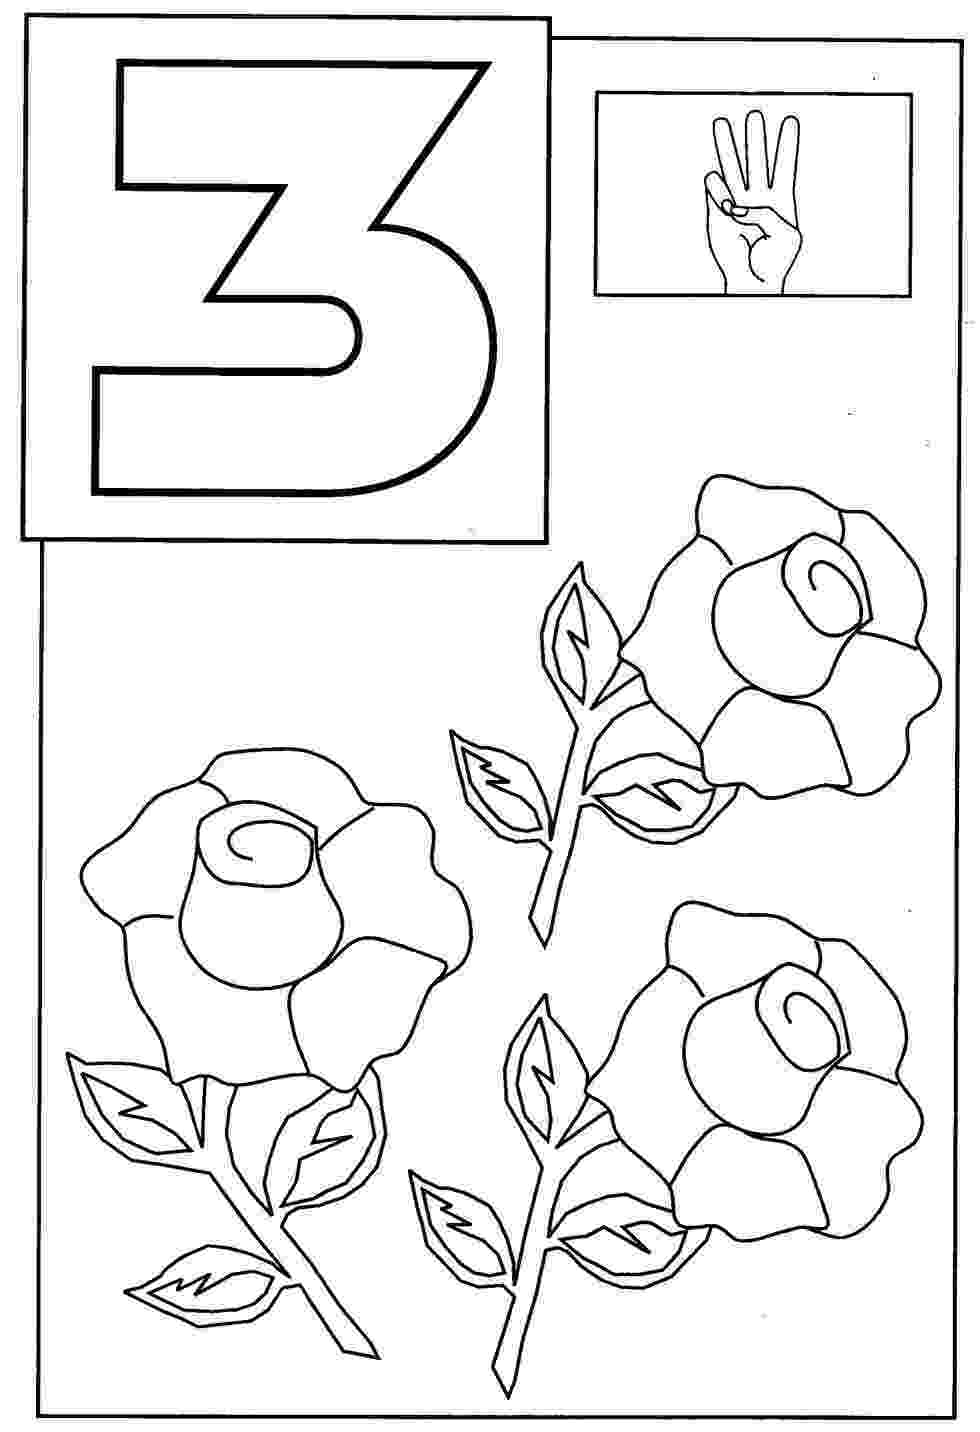 number 3 coloring page number three learning to write simple handwriting number 3 page number coloring 